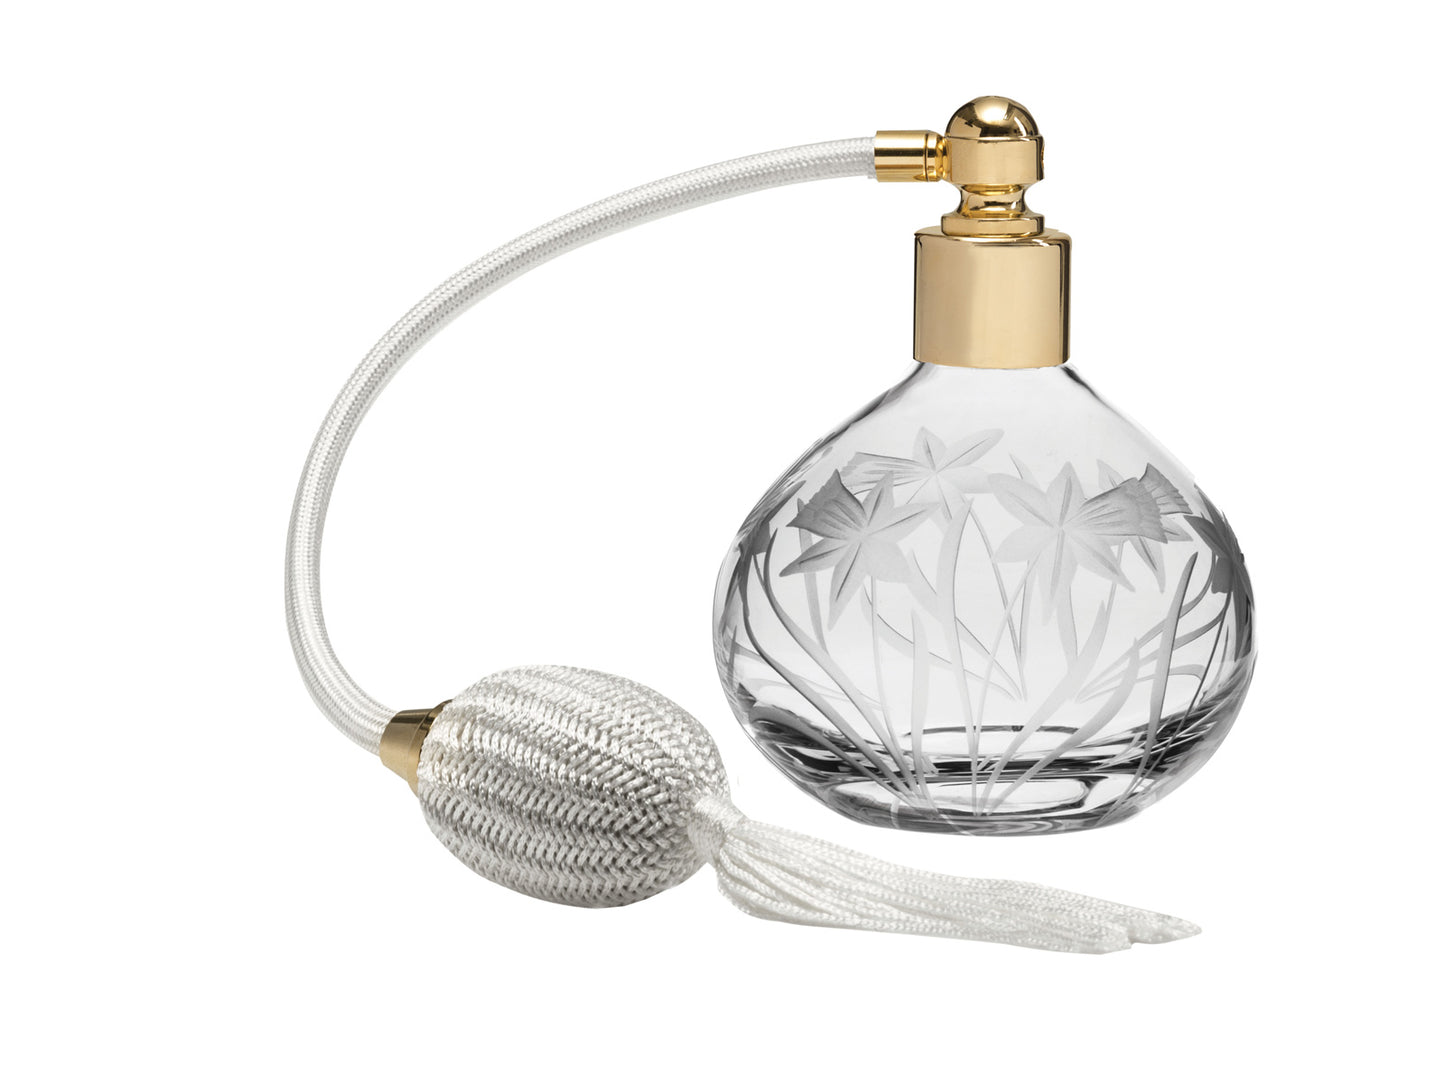 A crystal perfume atomiser with a round base, decorated with a delicate daffodil motif cut into the glass, fitted with gold hardware and a cream puffer